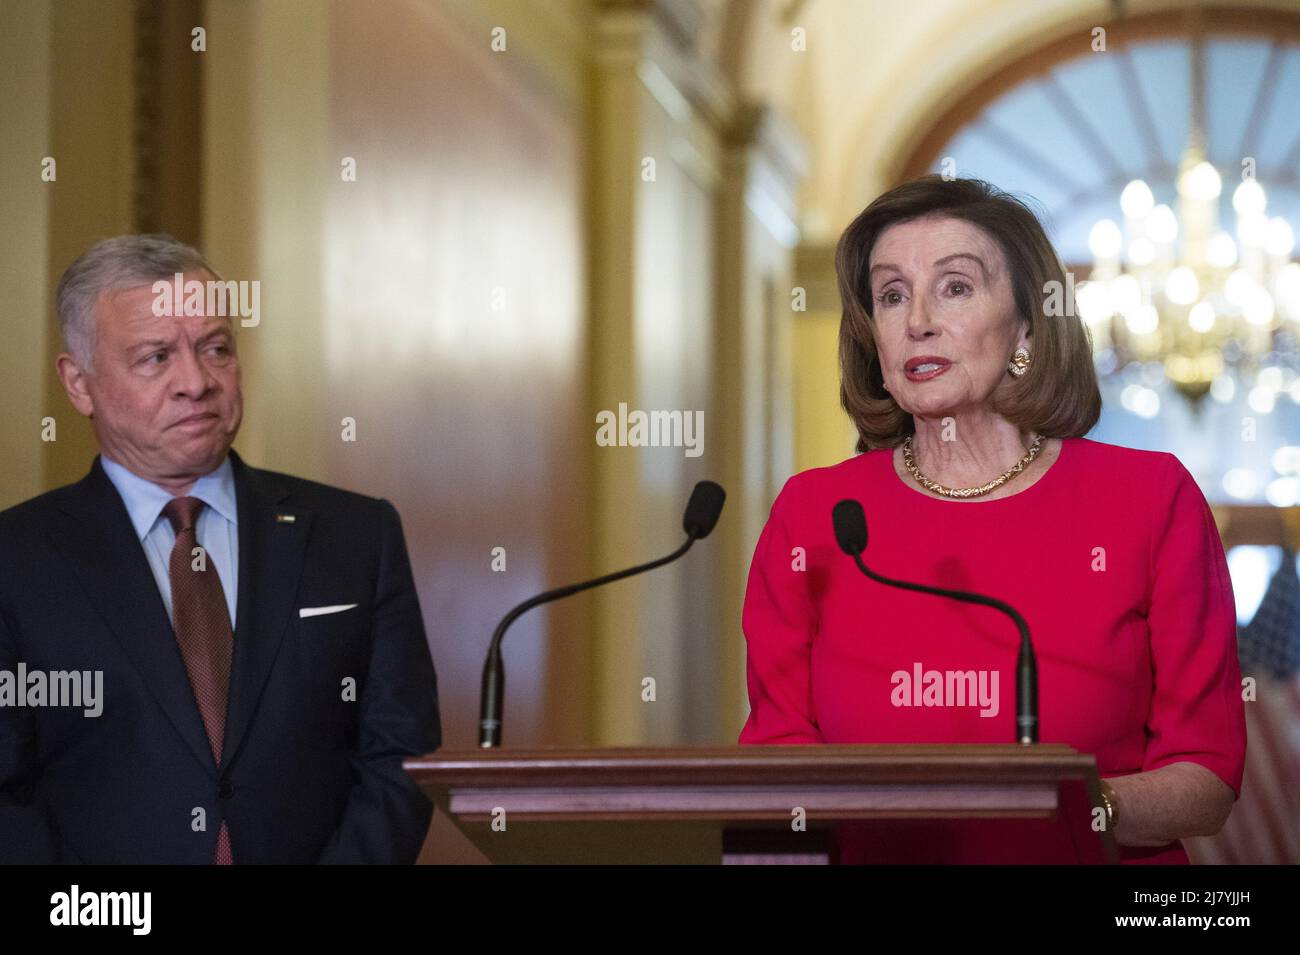 Washington, United States. 11th May, 2022. Speaker of the House Nancy Pelosi speaks during a photo-op with King Abdullah II bin Al-Hussein of Jordan at the U.S. Capitol in Washington, DC on Wednesday, May 11, 2022. Photo by Bonnie Cash/UPI Credit: UPI/Alamy Live News Stock Photo